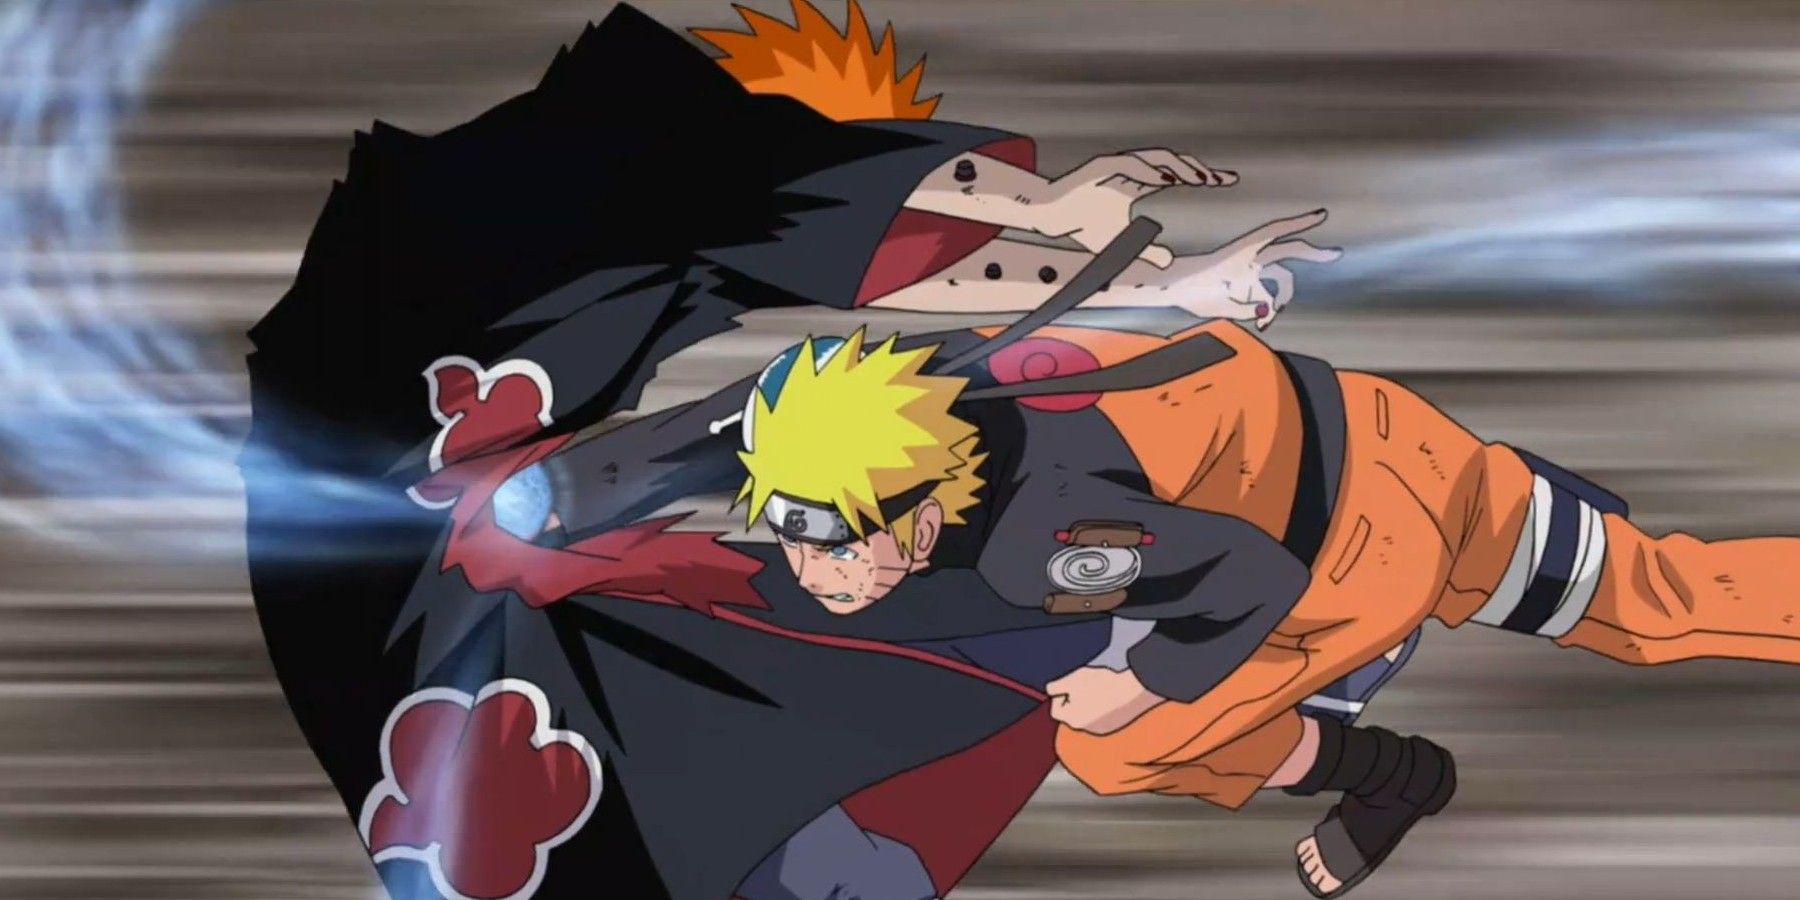 Naruto defeating one of the six paths of Pain using his Rasengan